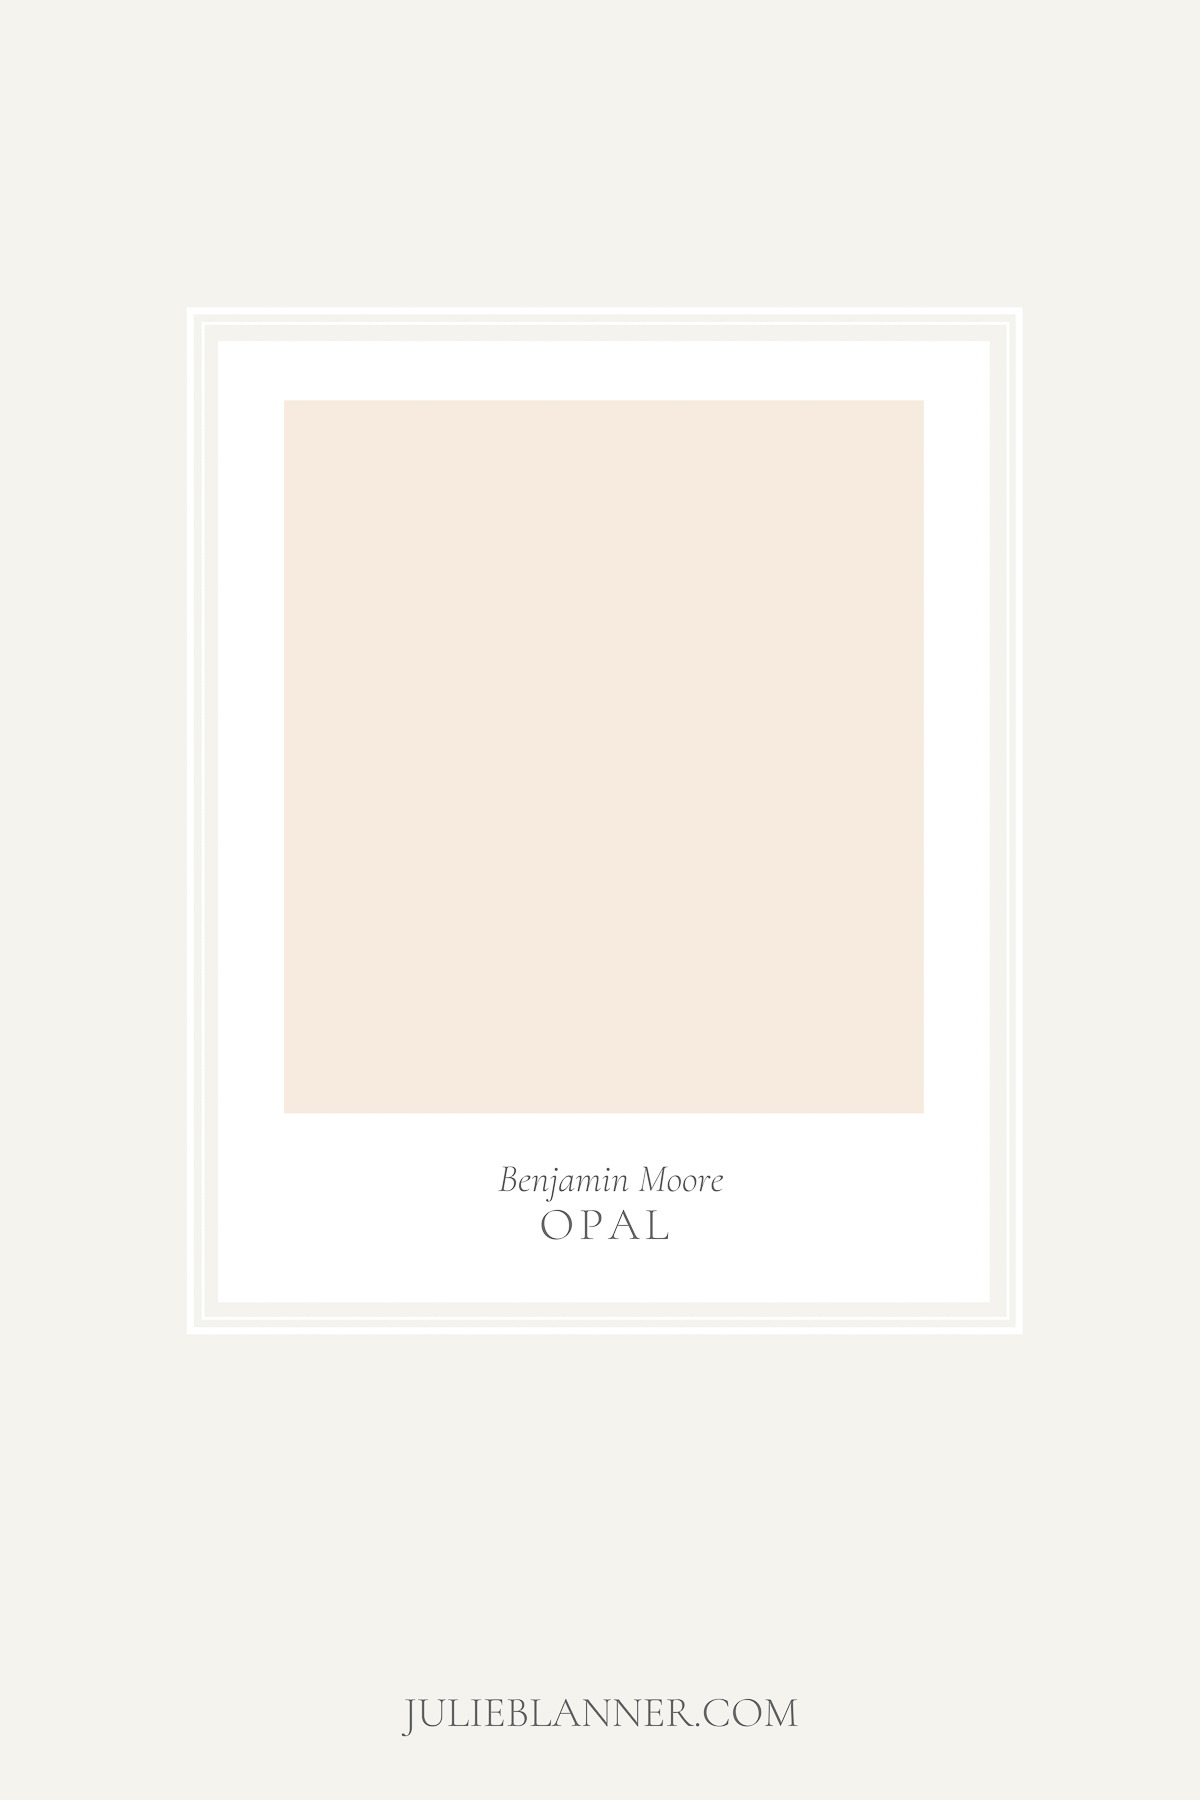 A paint sample card of Benjamin Moore Opal, as part of a blush pink paint guide.